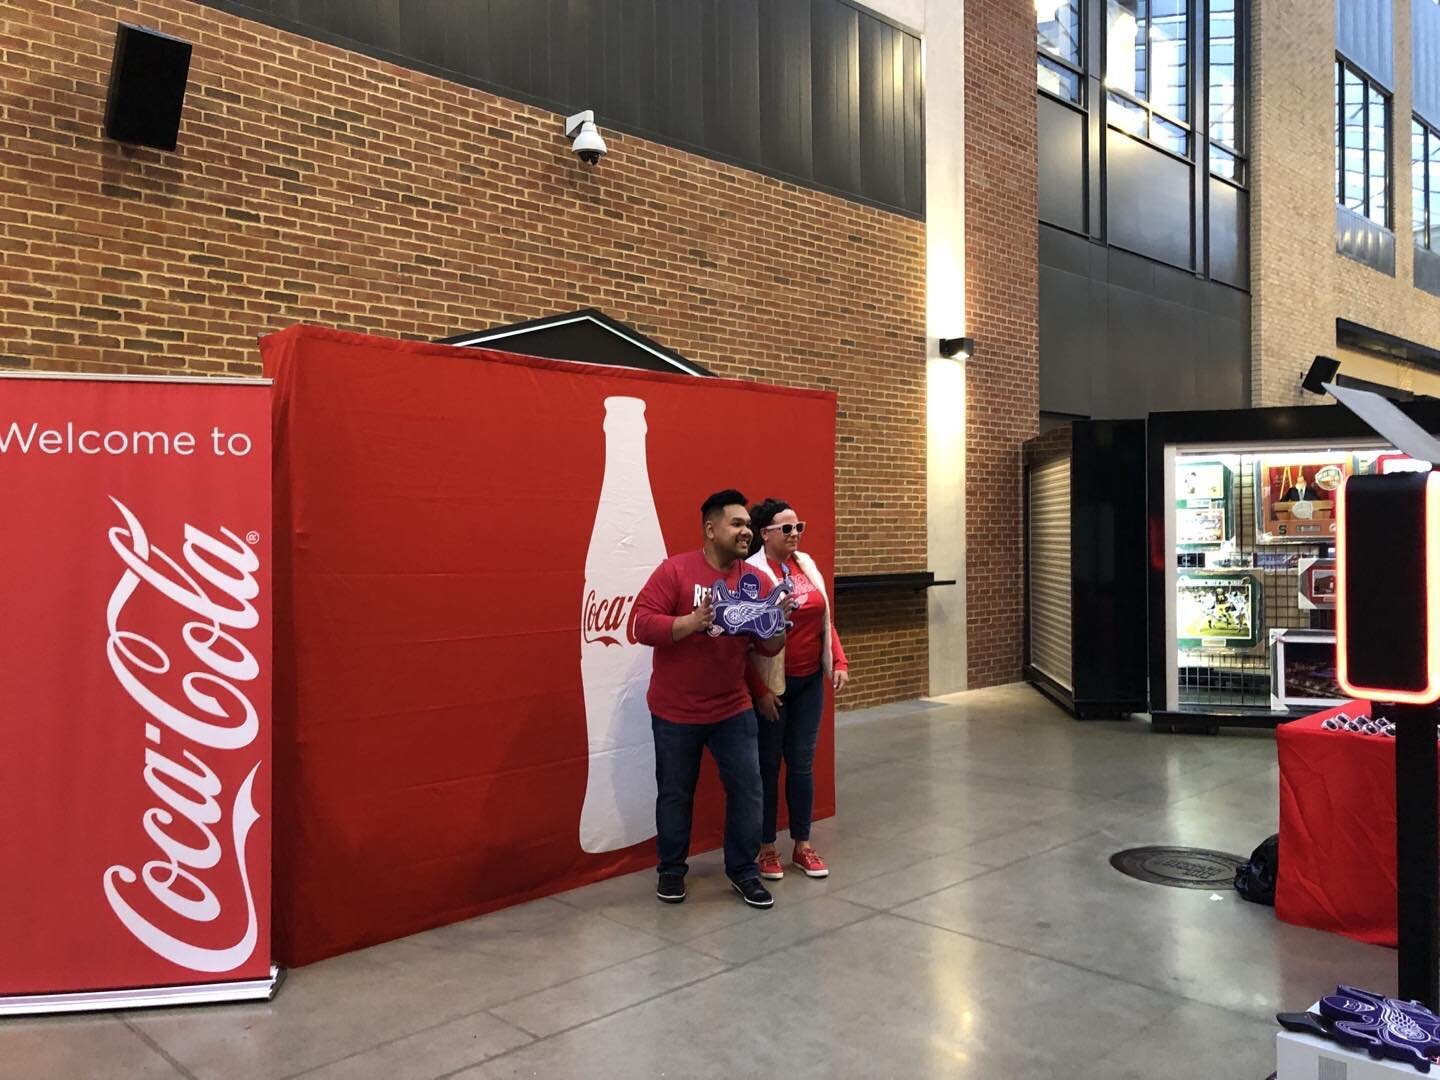 Coca-Cola is excited to be a part of the Detroit Red Wings Fan Fest at Little Caesars Arena! 🏒🥤 it was an unforgettable day of hockey, fun activities, and refreshing Coca-Cola beverages. #RedWingsFanFest #CocaCola #TasteTheFeeling #LittleCaesarsAre